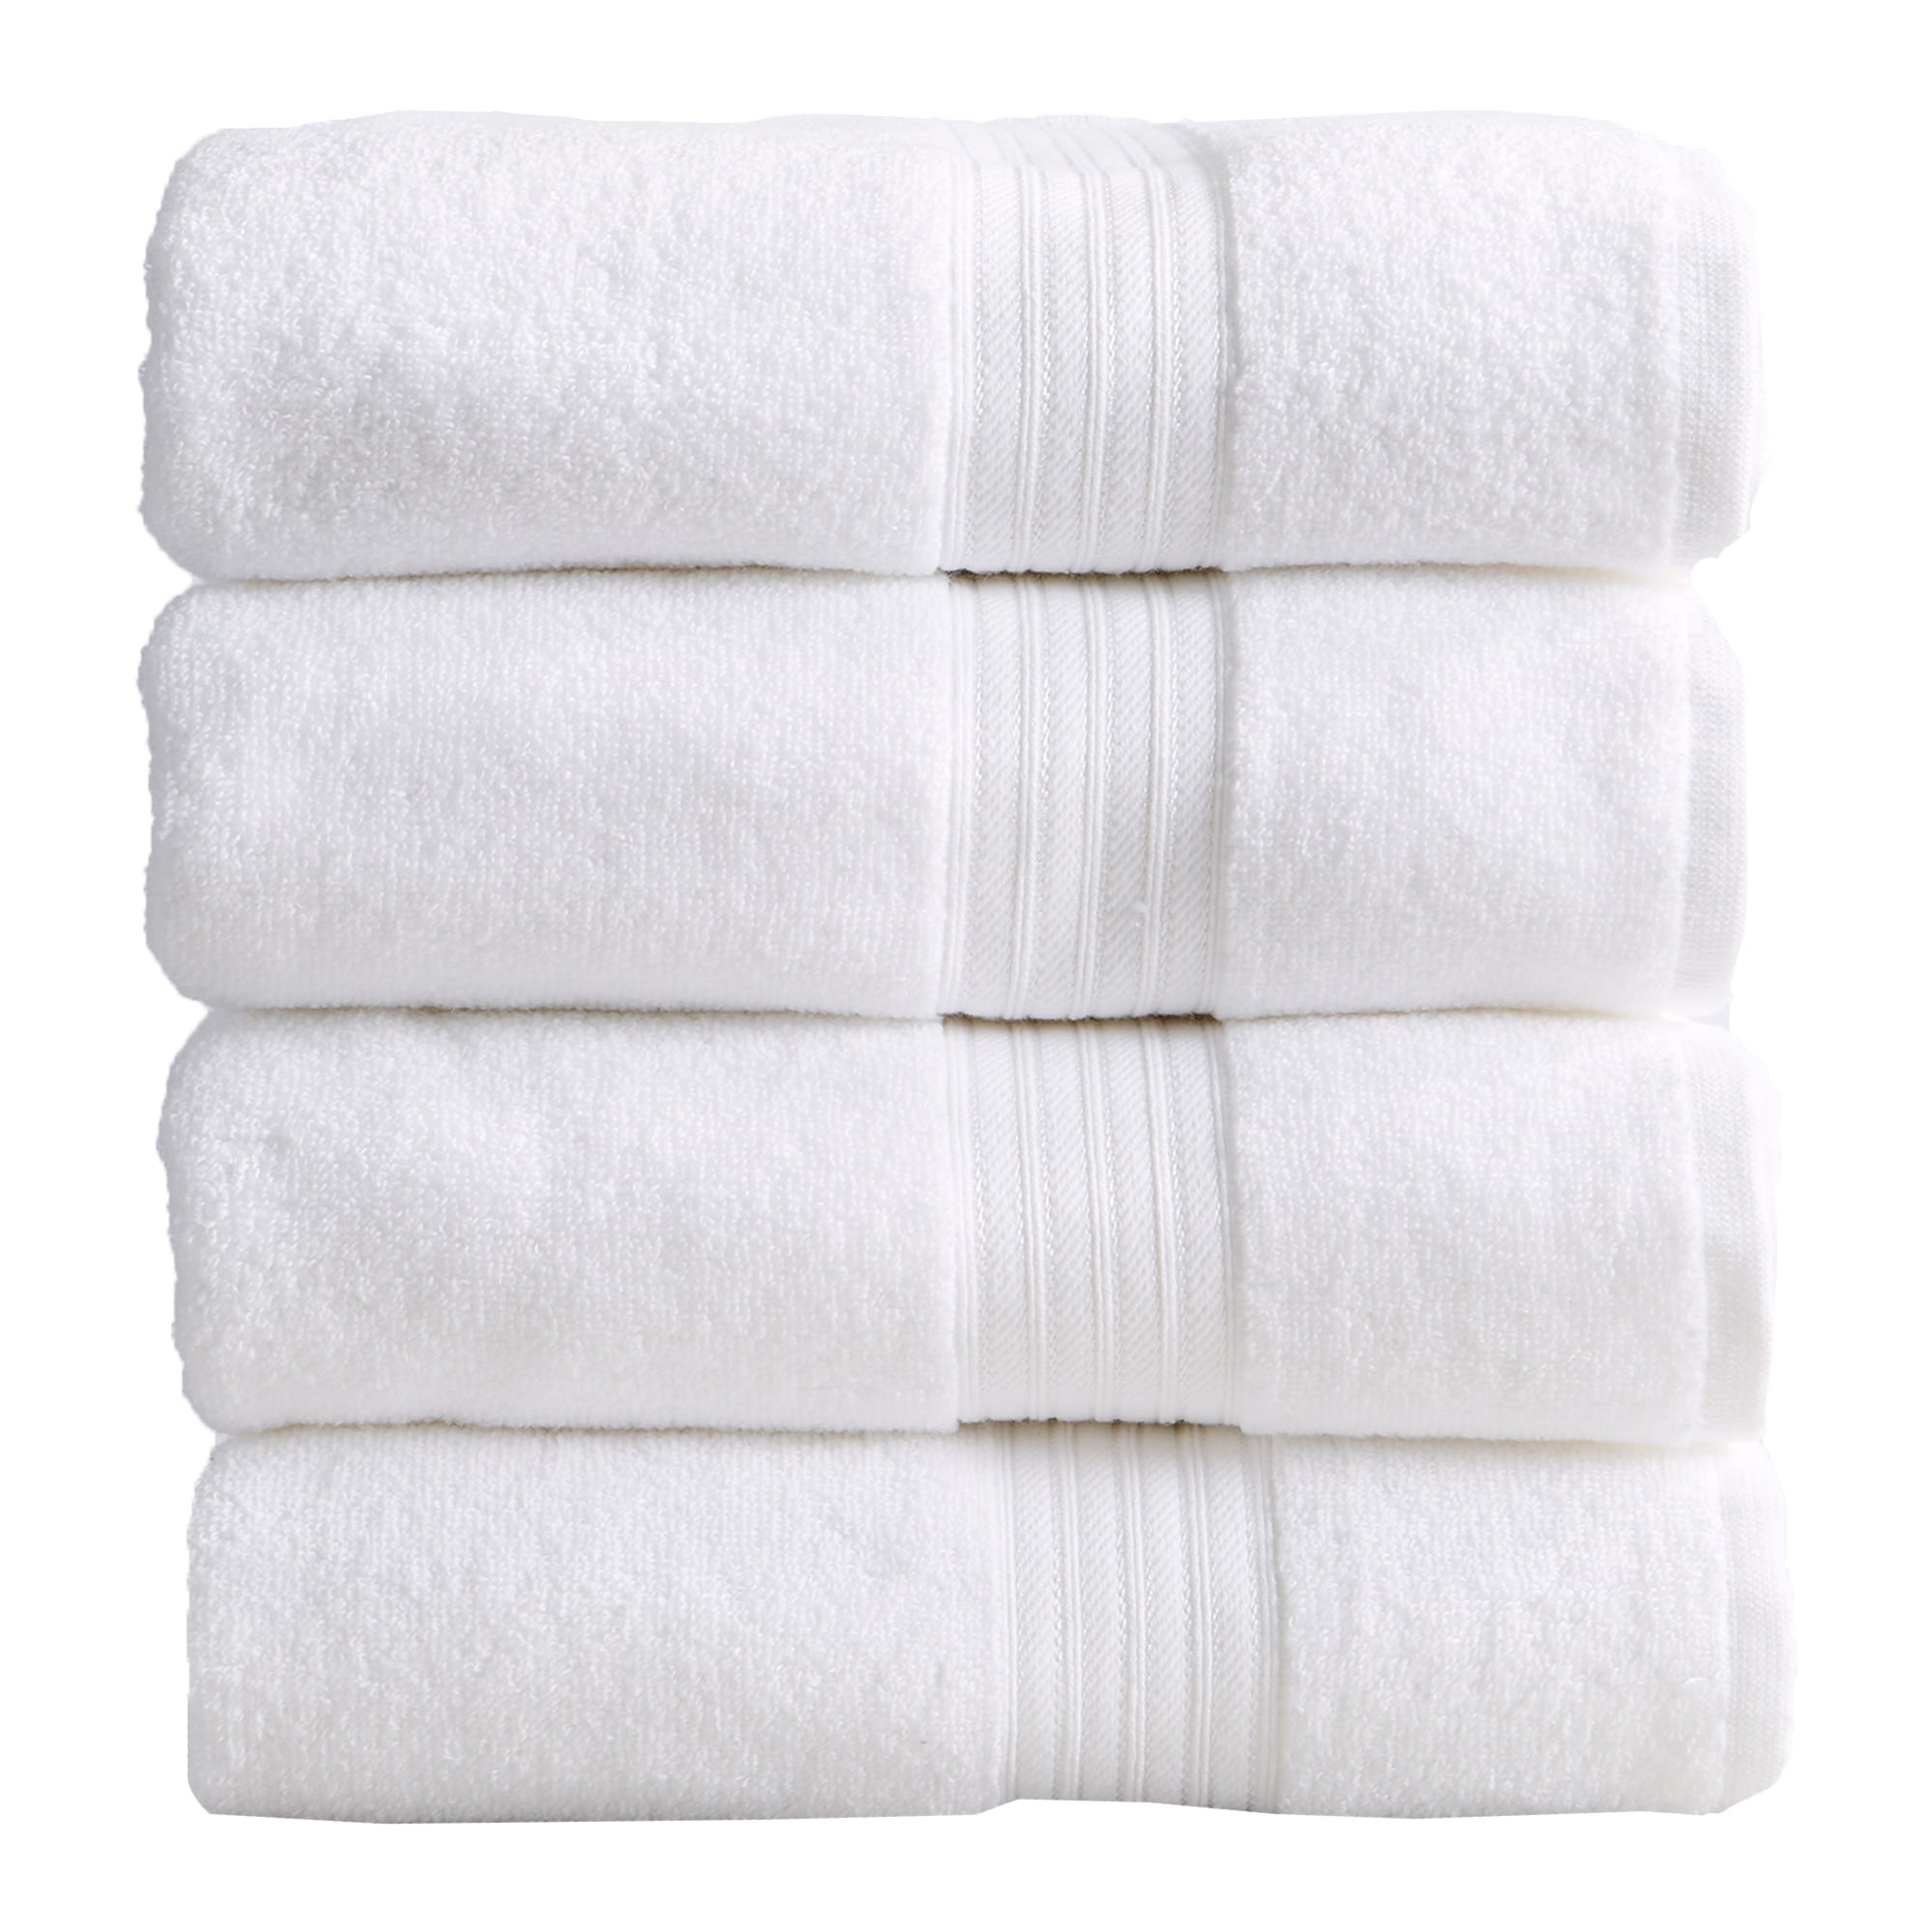 ROSE-SOFT® Bath Towel - 22x44 White Rose Soft, Royal Rose, Terry Towels,  Hotel Towels, Nursing Home Towels, Prison Towels [TTR023] - $3.55 : BC  Textile Innovations, - Commercial Linen, Uniforms, and related Laundry  Supplies